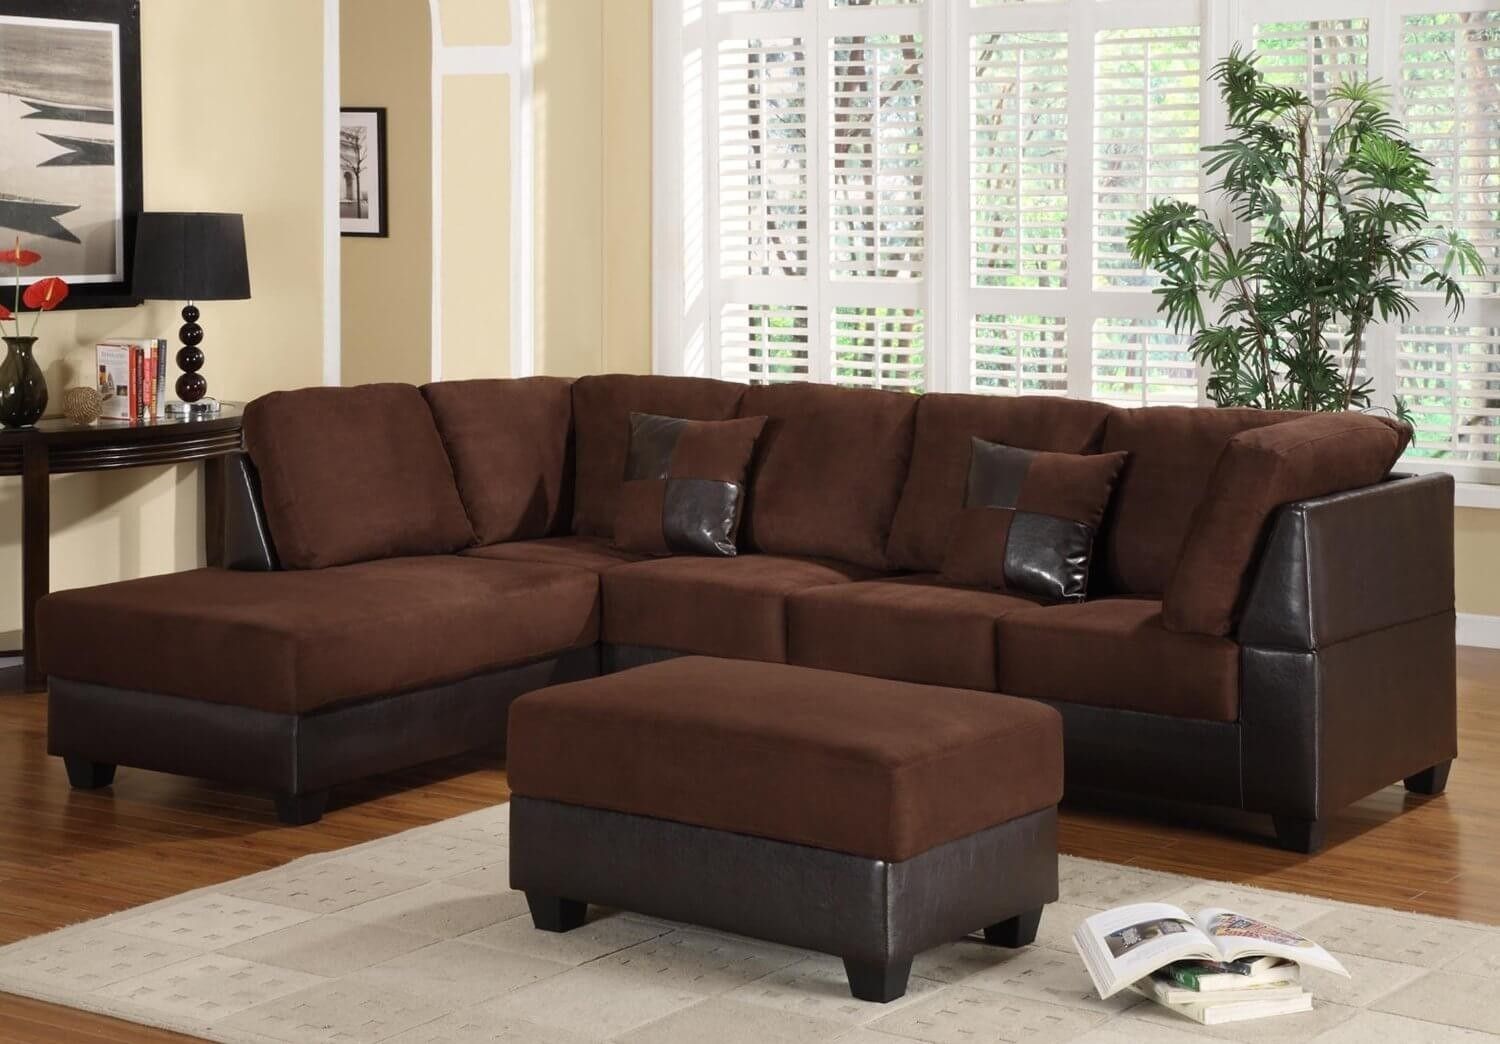 Inspirational Soft Sectional Sofa Under 400 Mediasupload Within Sectional Sofas Under 400 